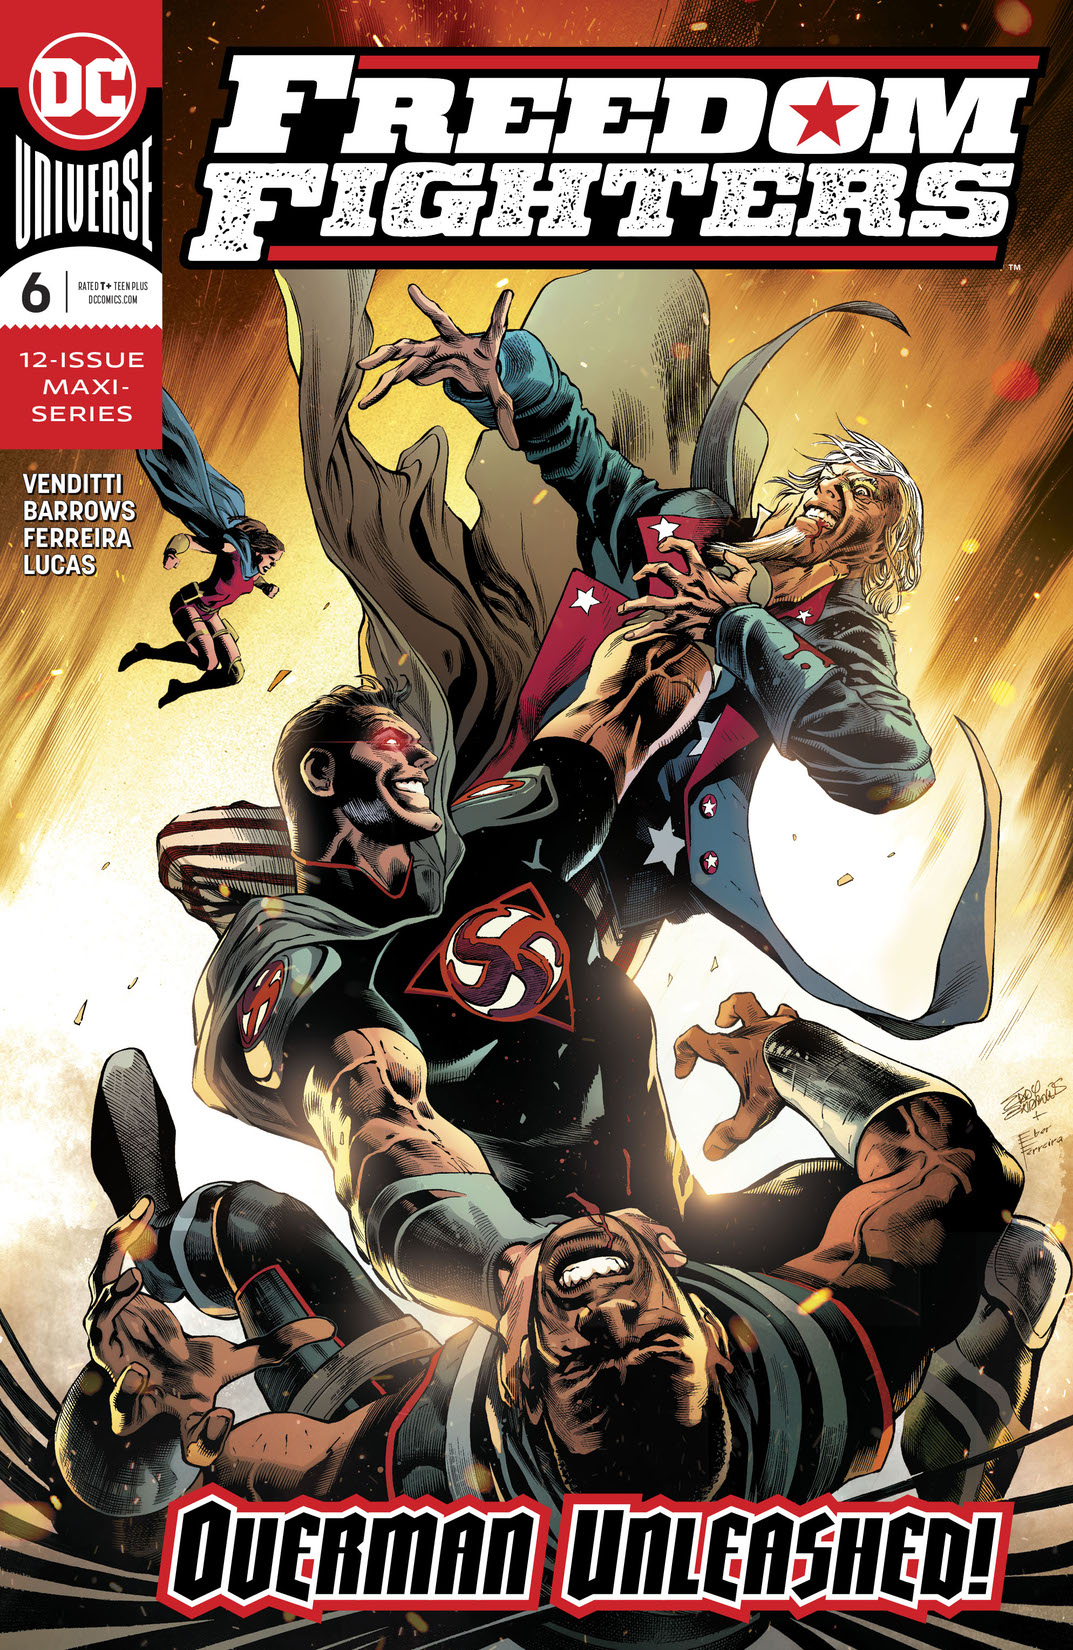 Freedom Fighters (2018-2019) #6 preview images